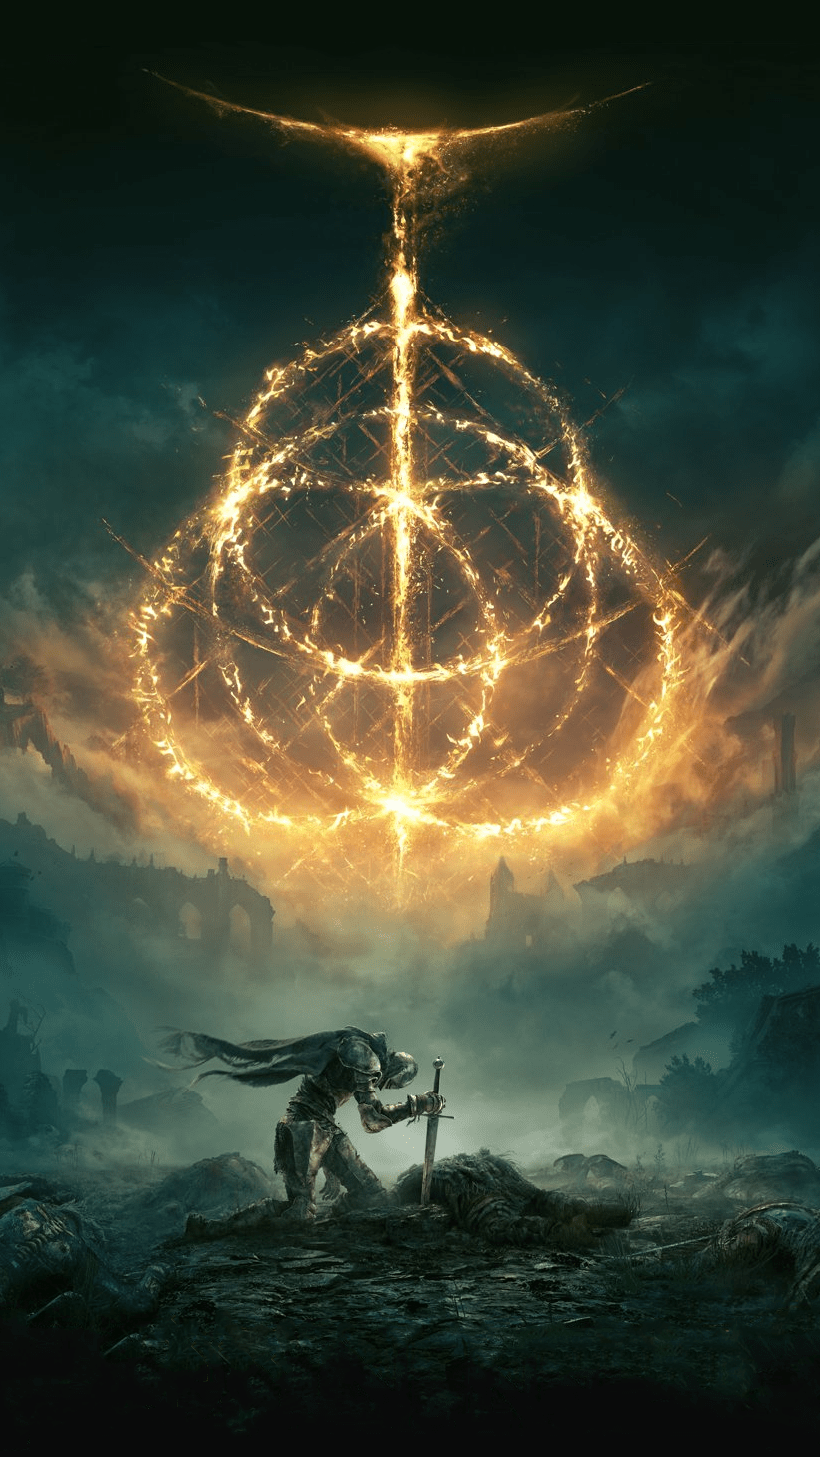 Ranni the Witch - Elden Ring - Mobile Wallpaper by Haraguroi You